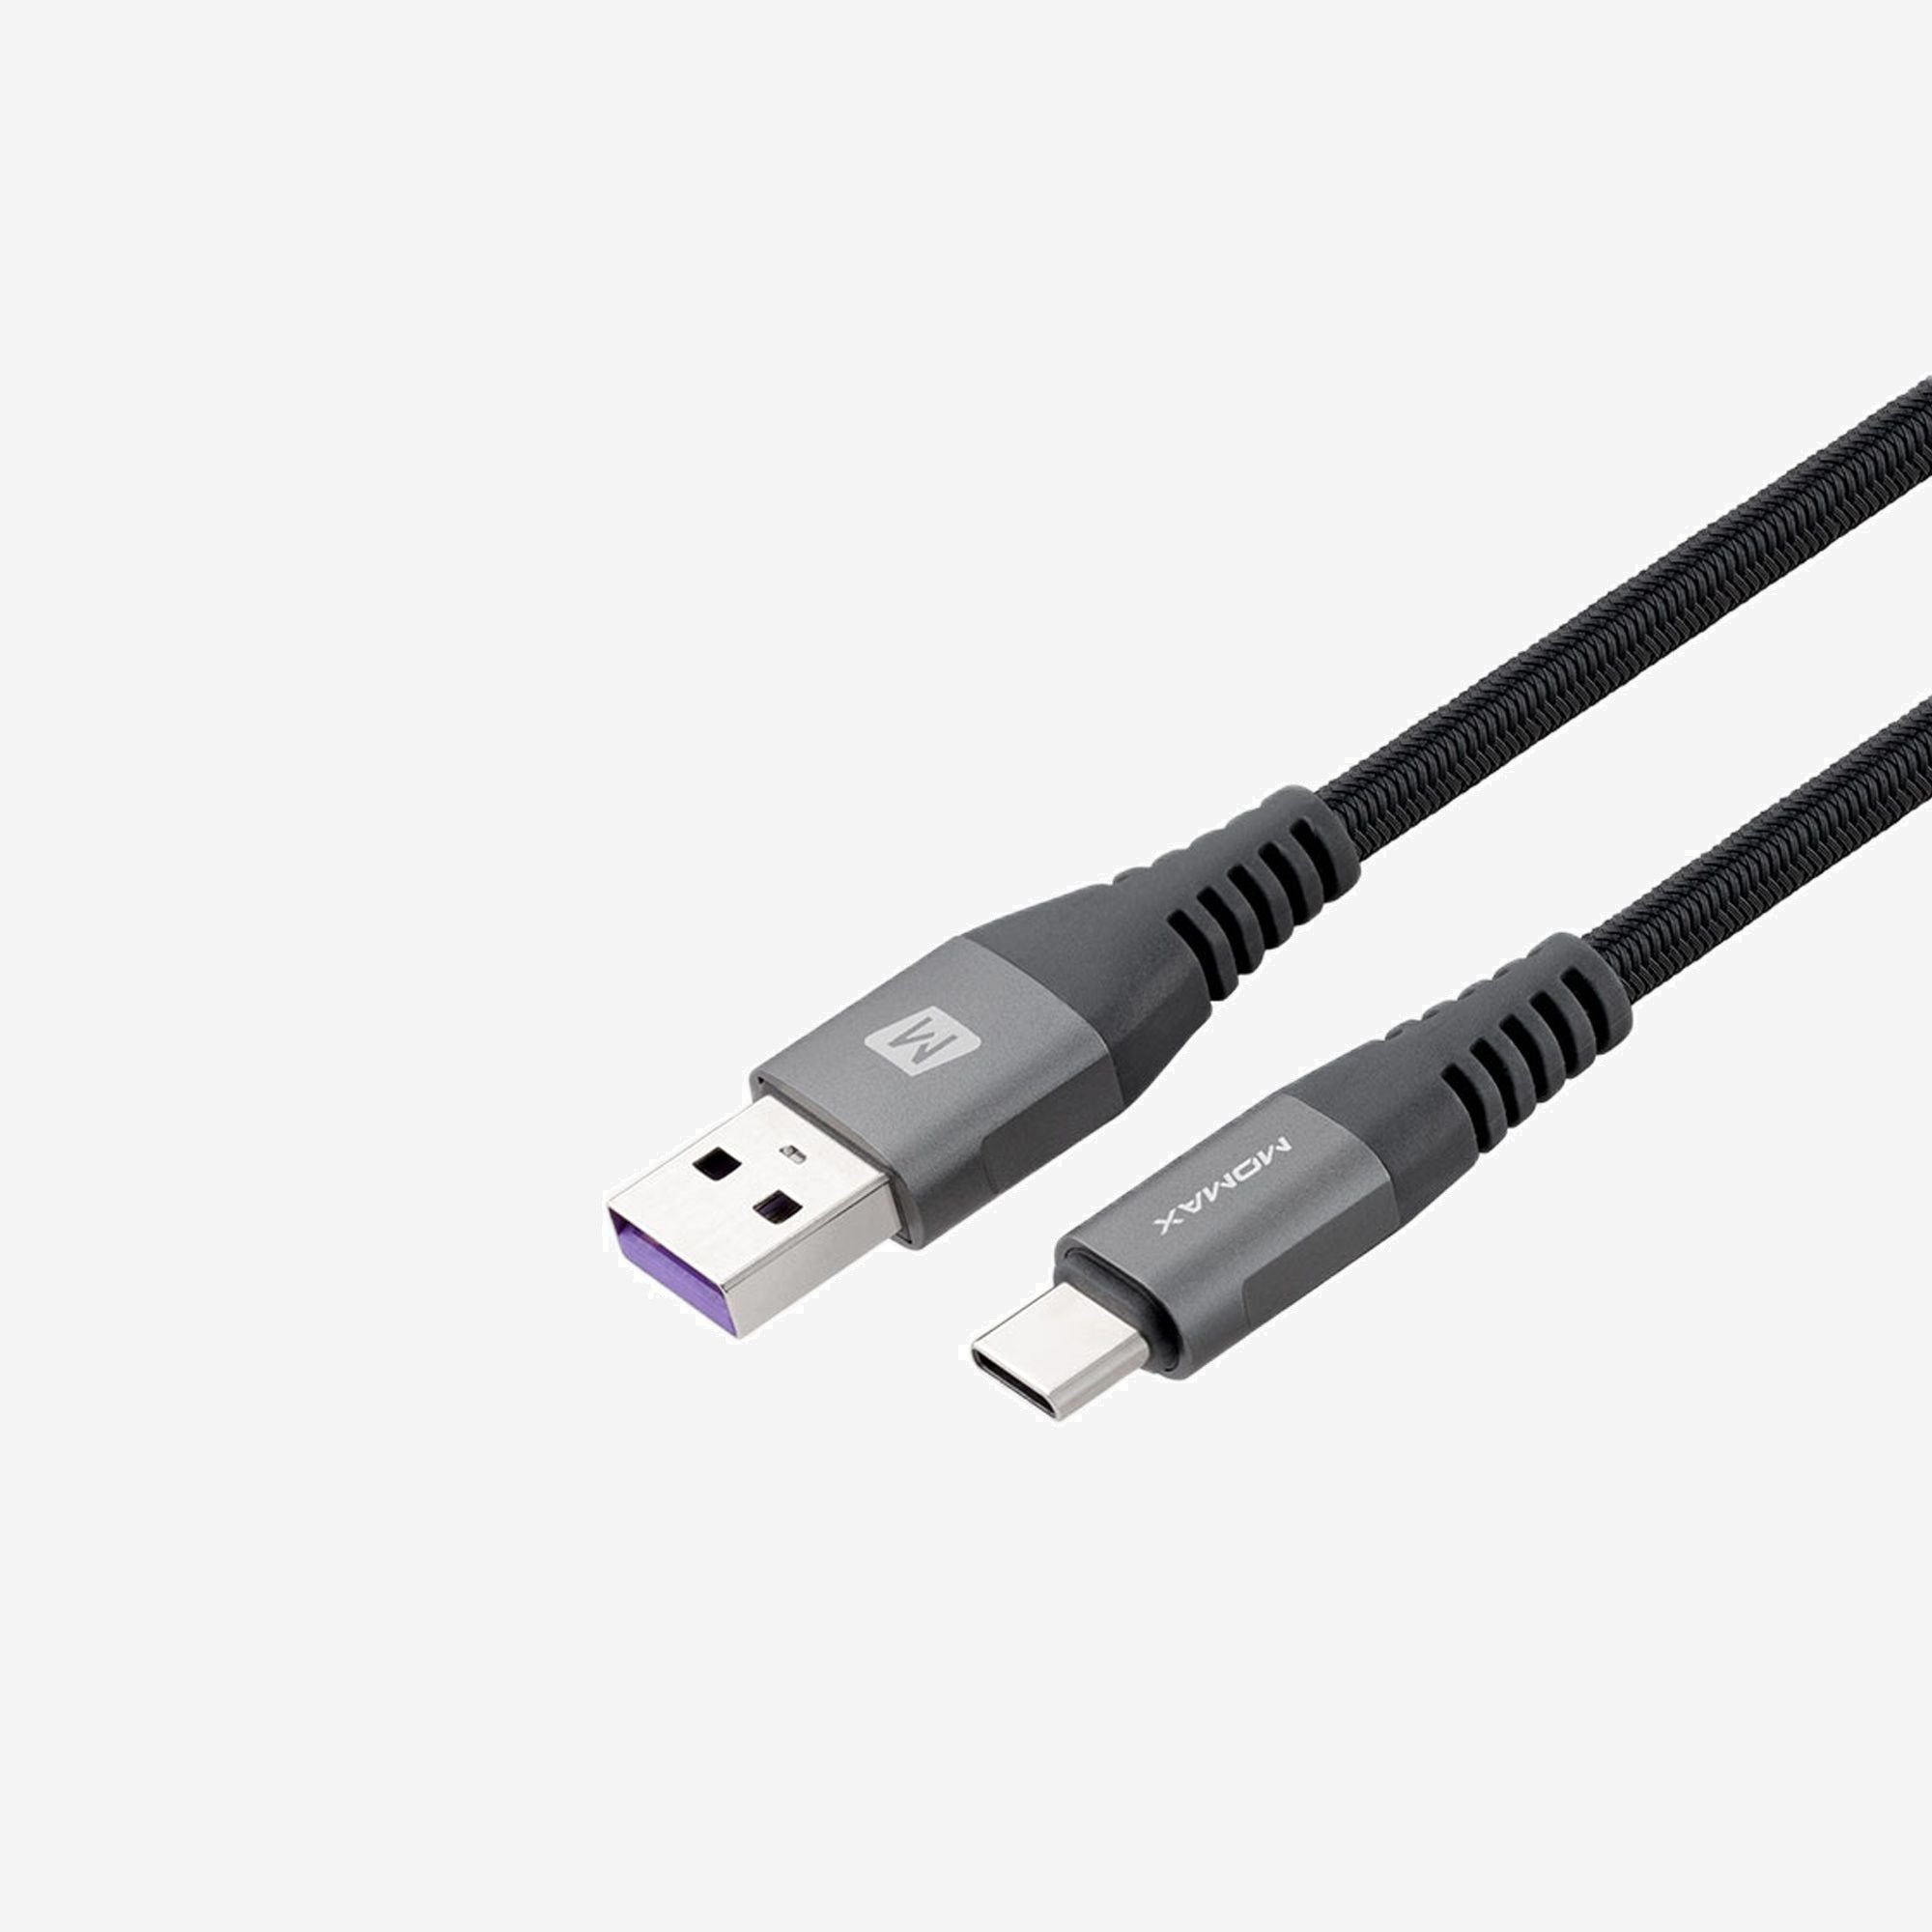 Elite Link USB-A to USB-C Cable 2M - Space Gray